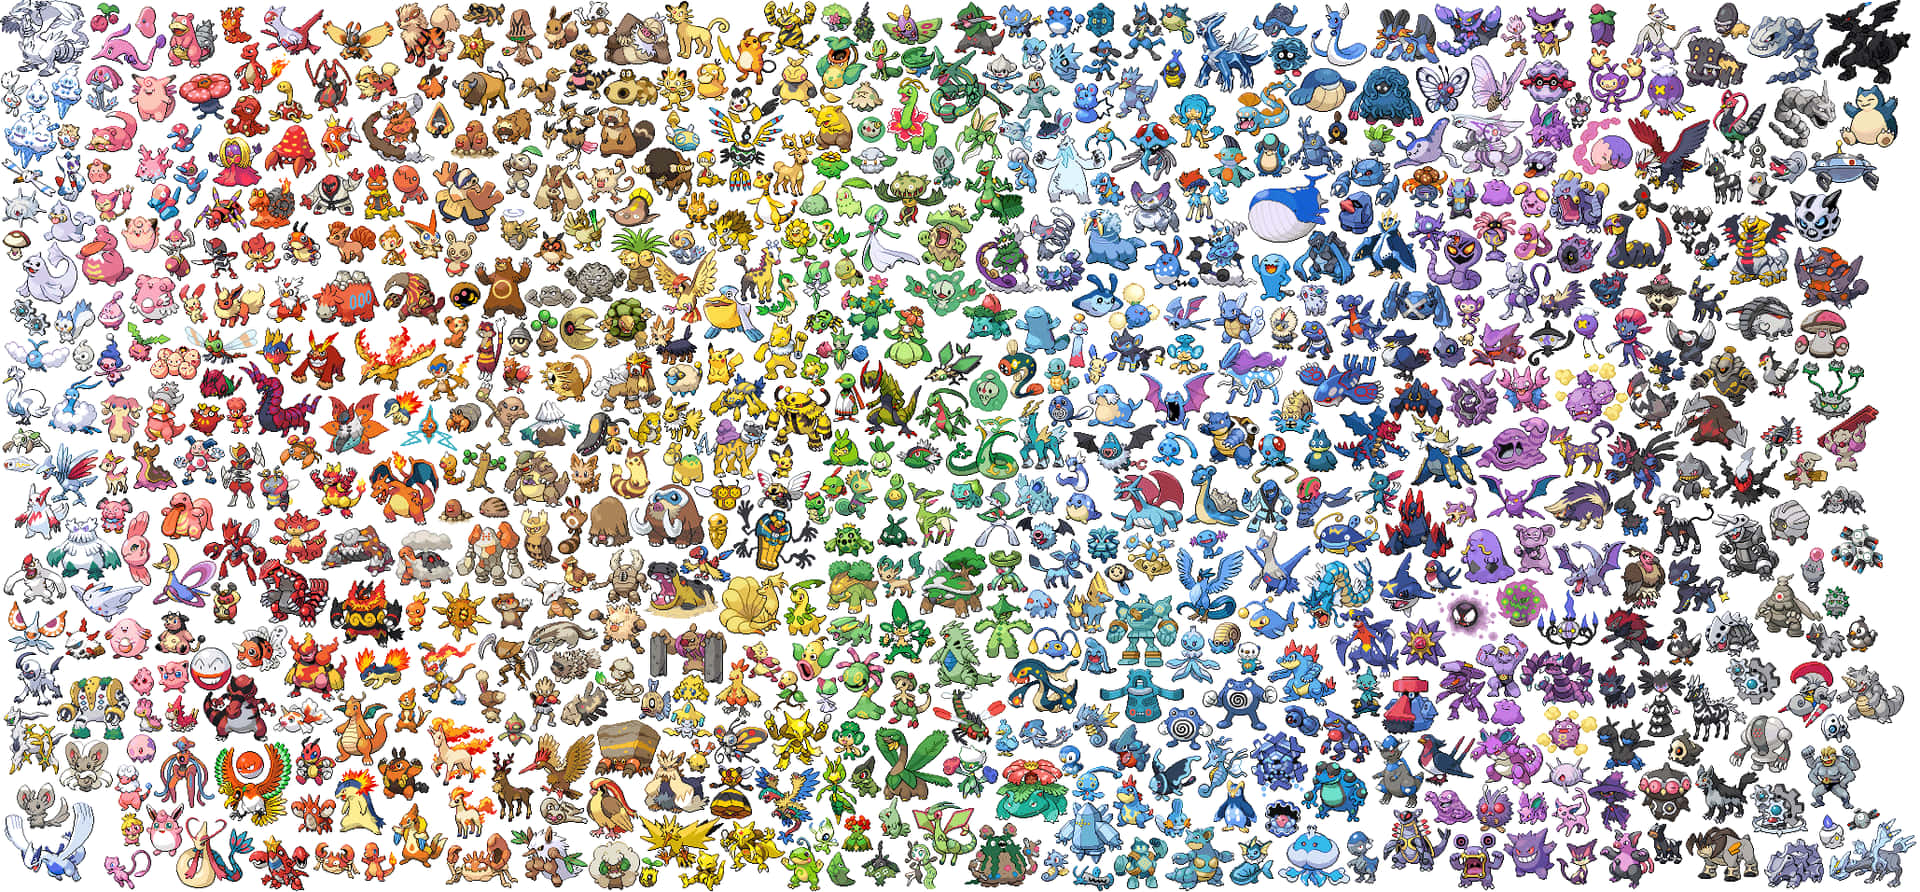 Image  All the Pocket Monsters of the Pokemon World